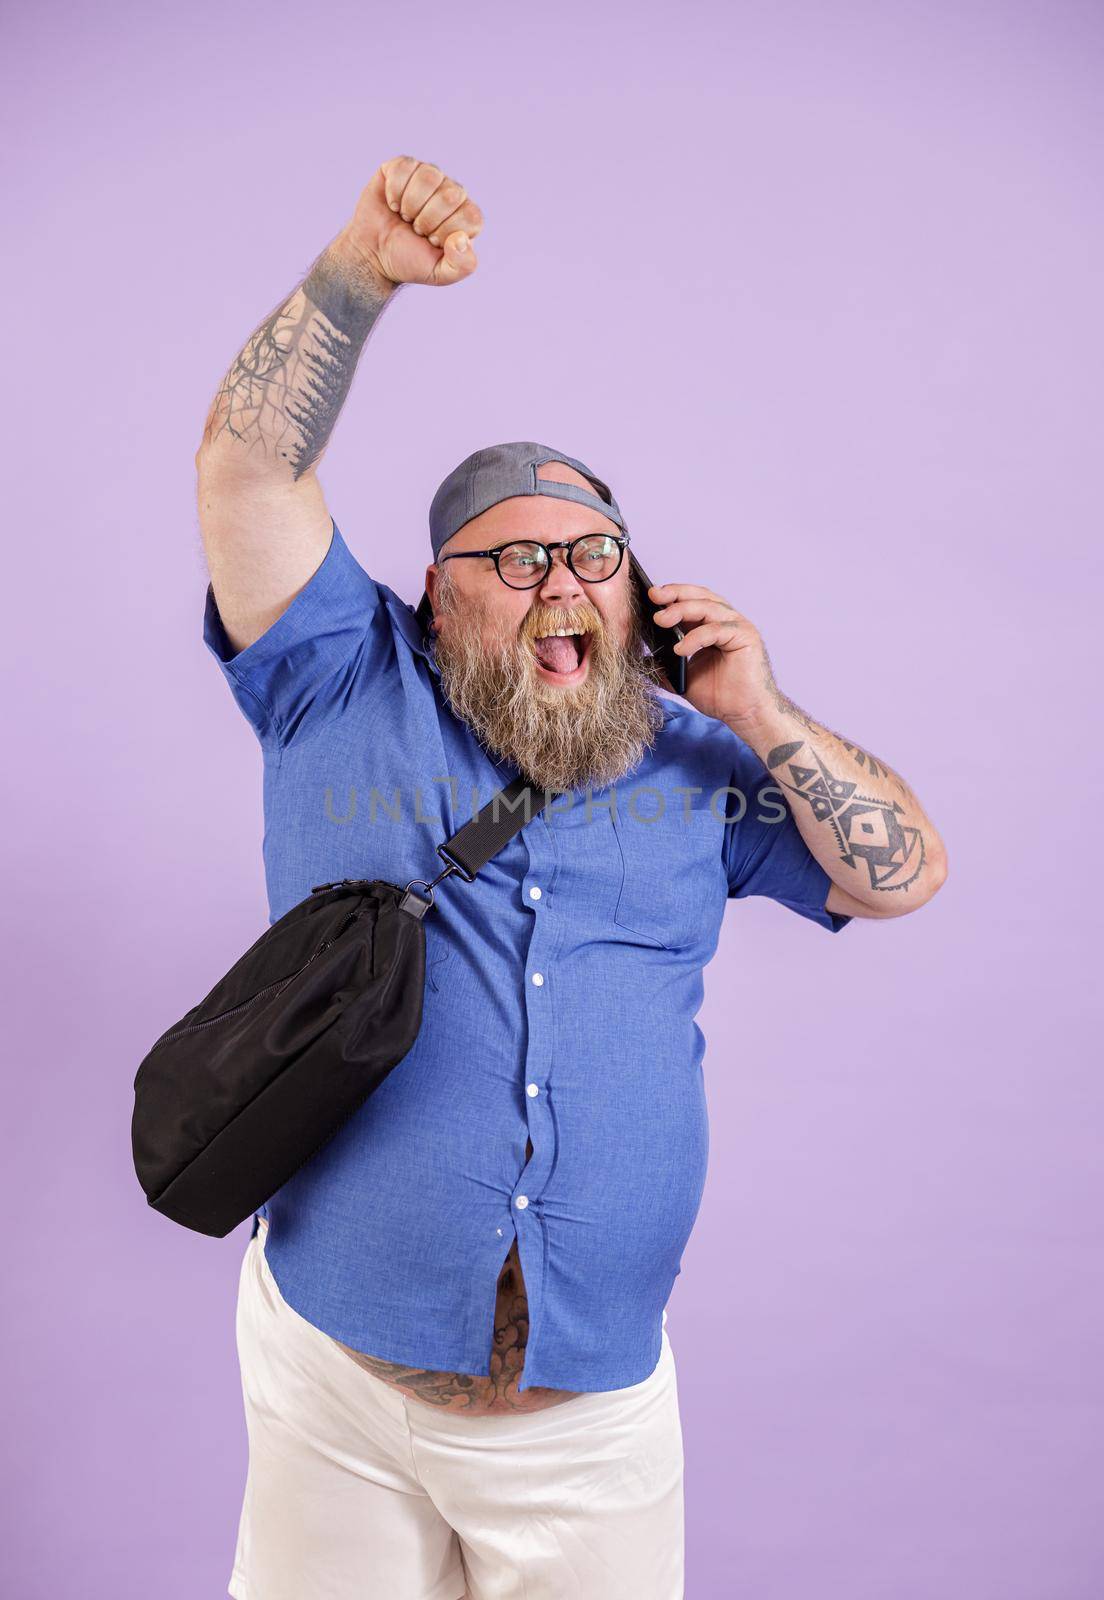 Excited obese man with bag talks on smartphone raising up fist on purple background by Yaroslav_astakhov